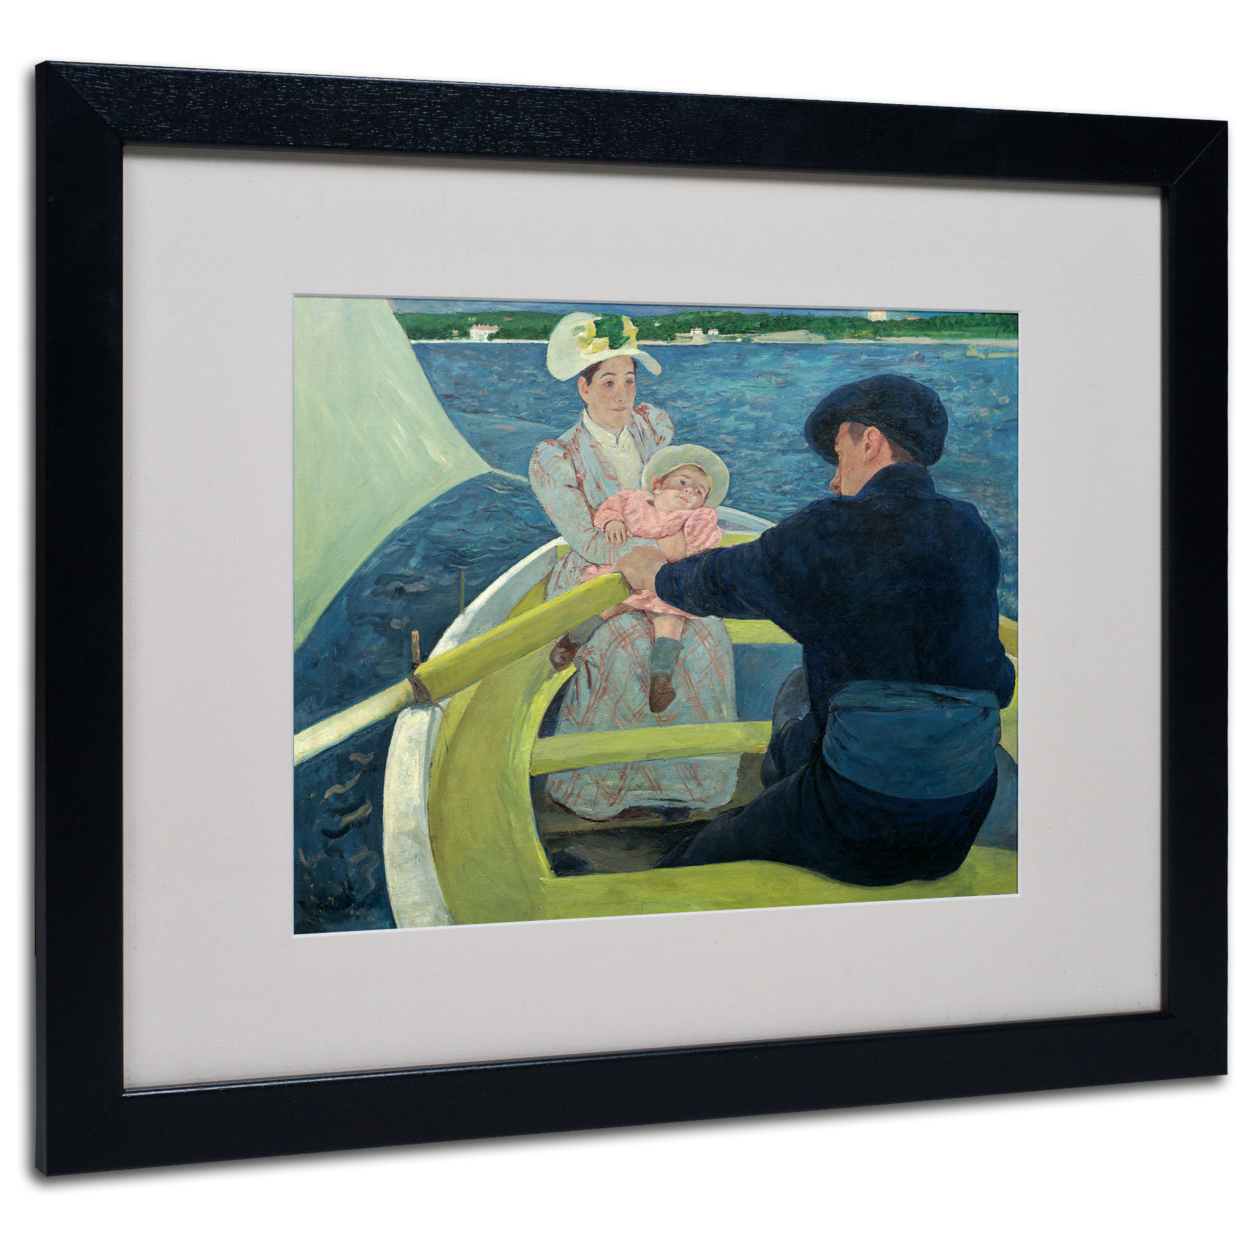 Mary Cassatt 'The Boating Party 1893-94' Black Wooden Framed Art 18 X 22 Inches